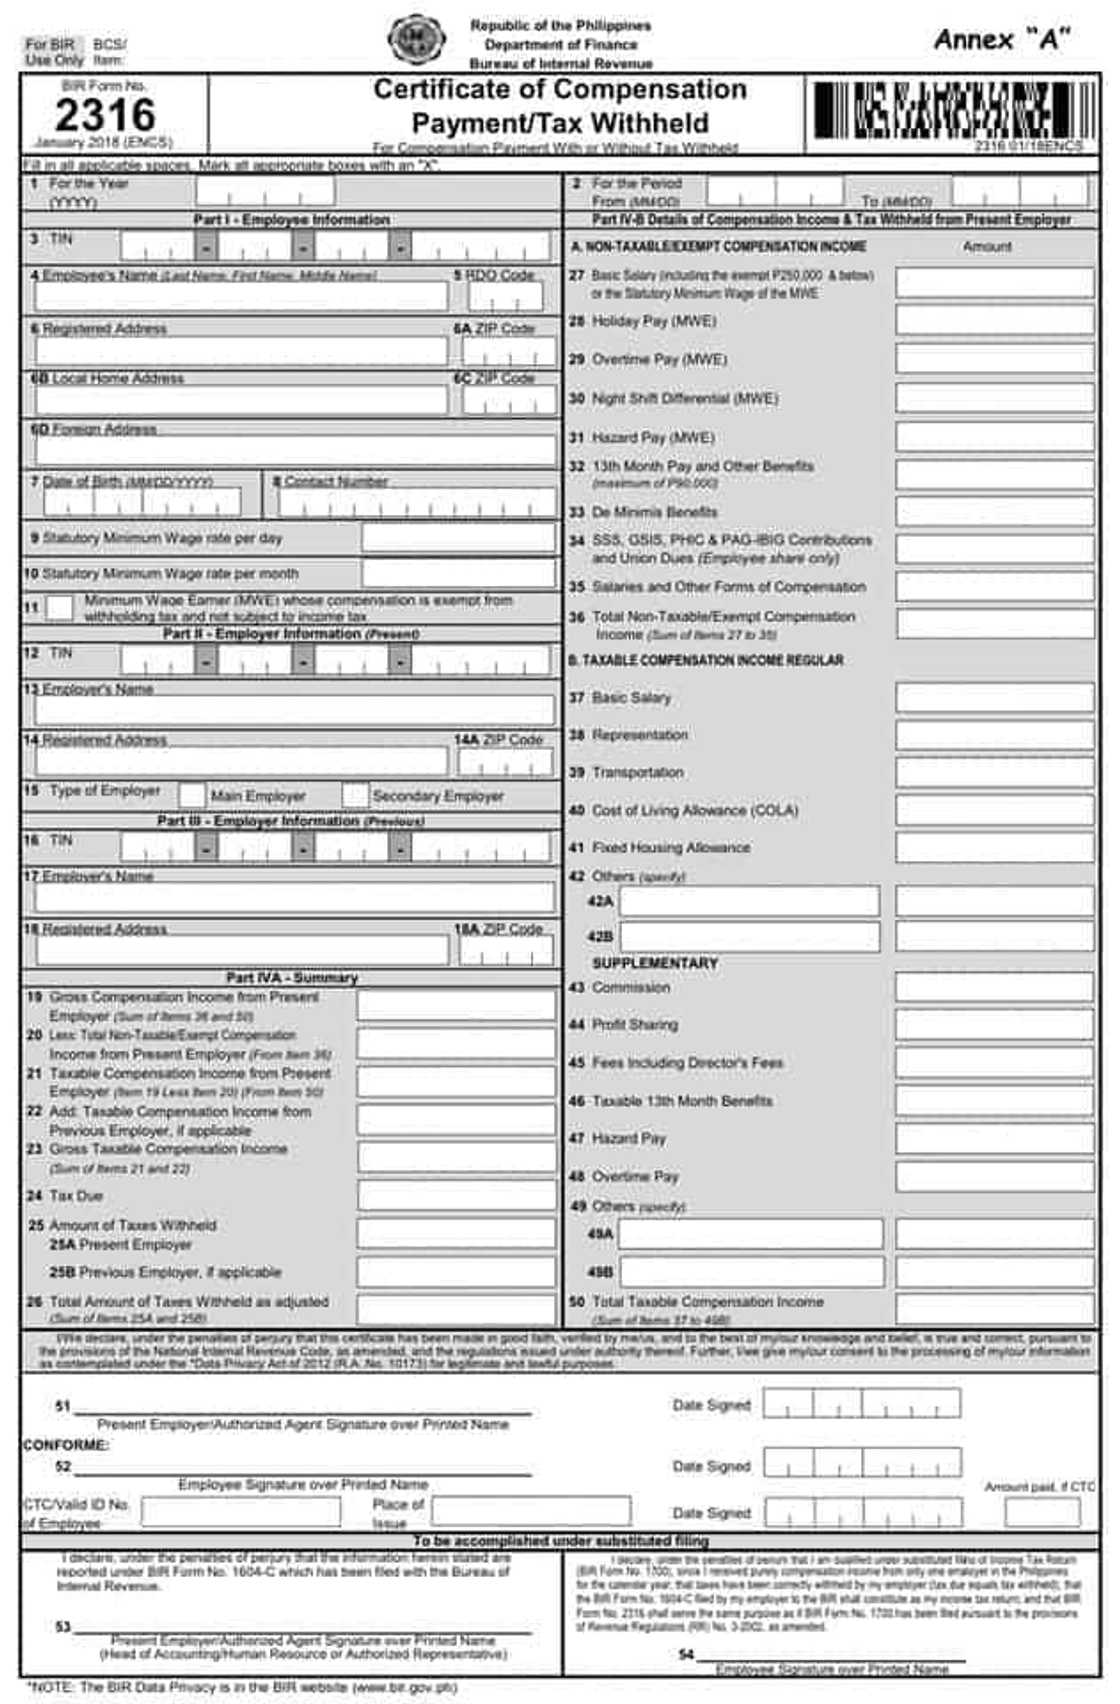 How to fill BIR Form 2316